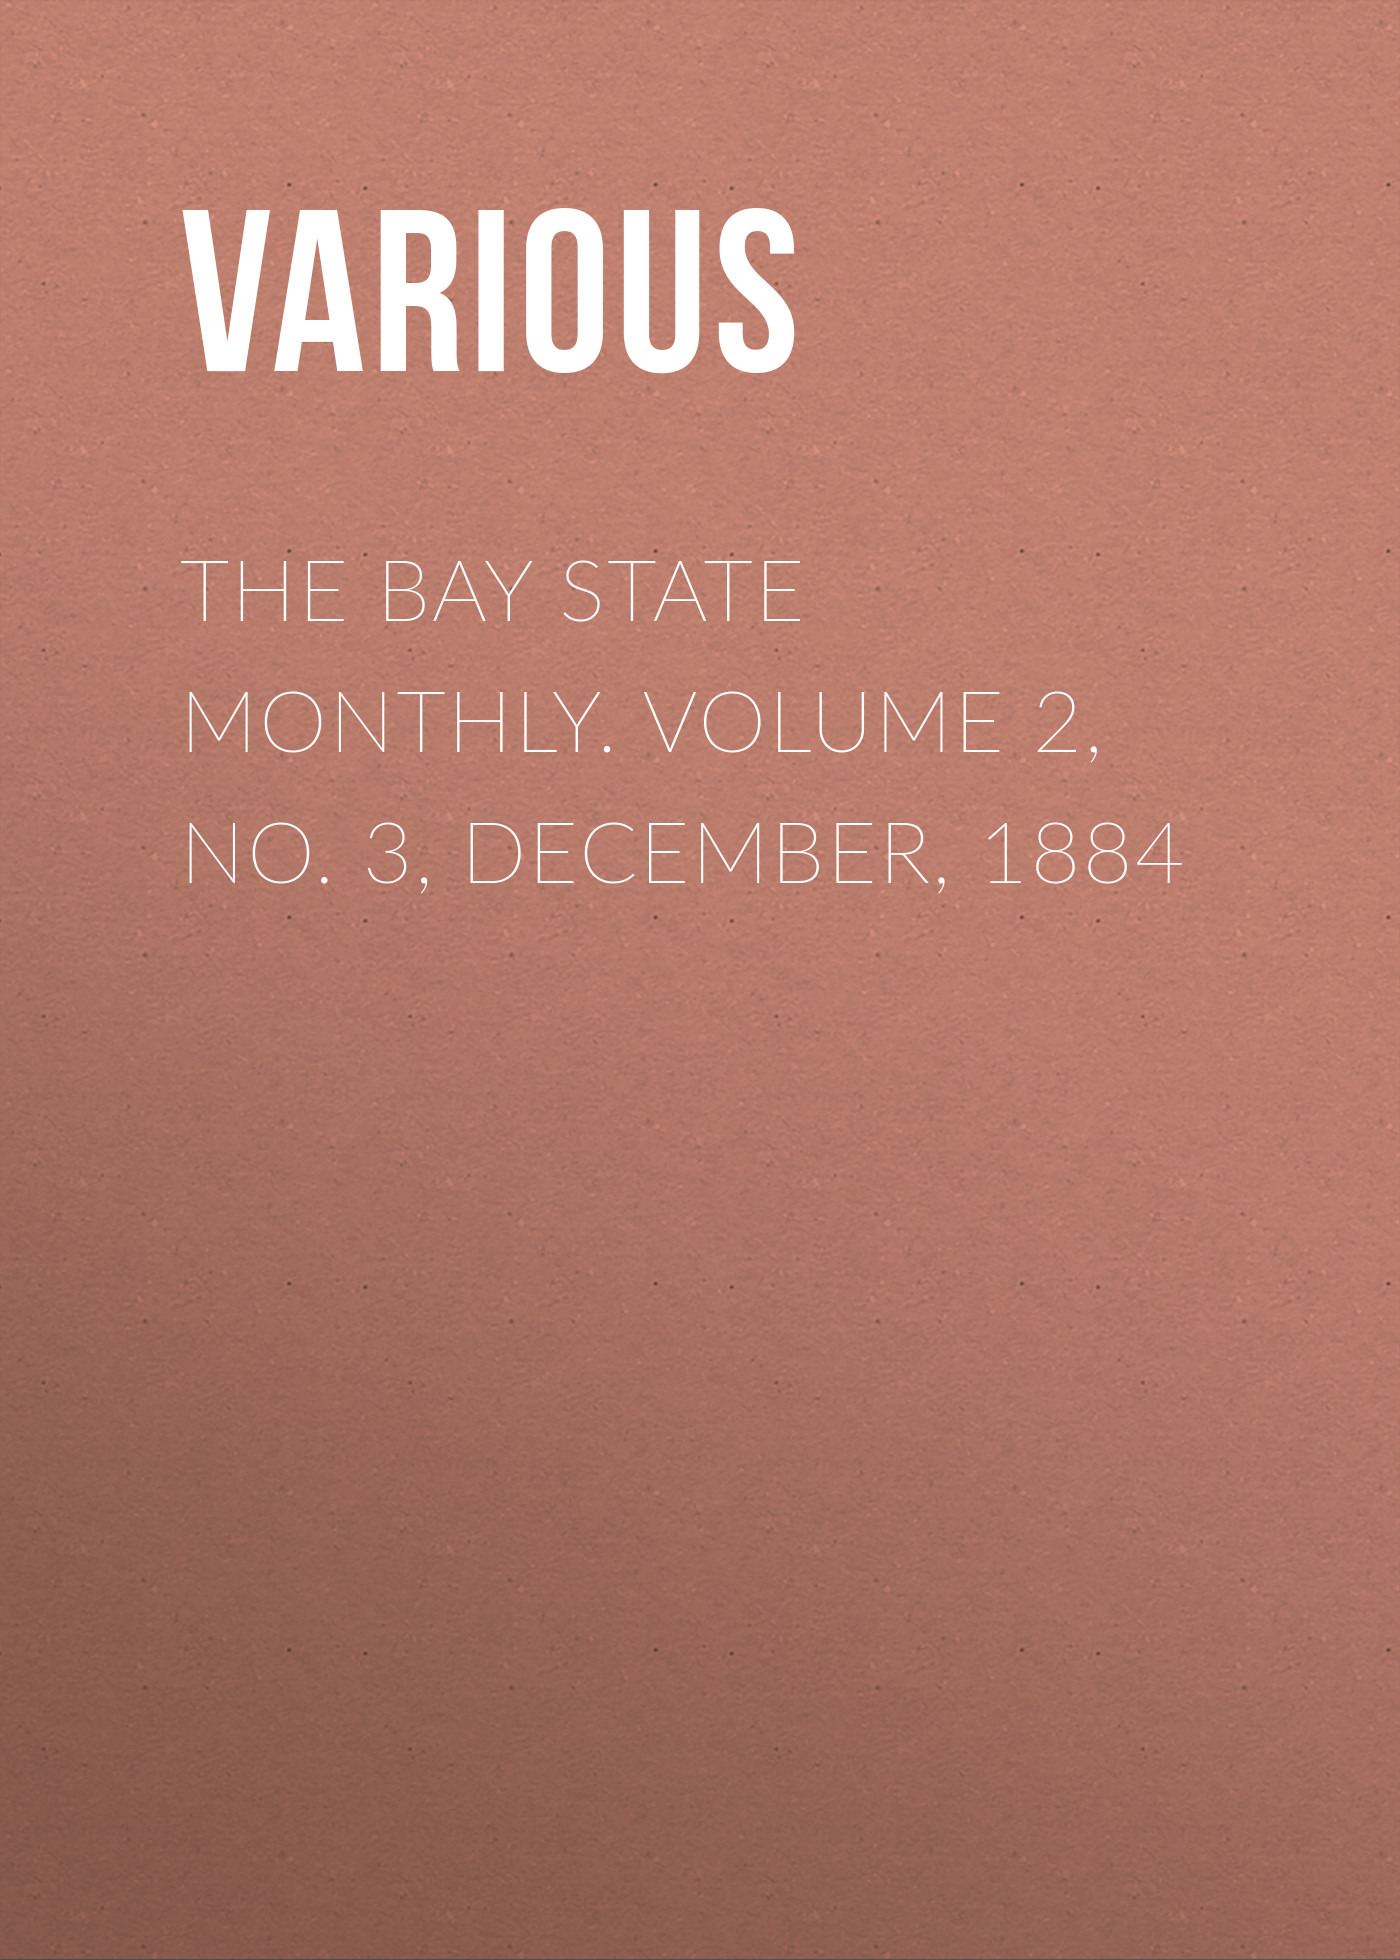 The Bay State Monthly. Volume 2, No. 3, December, 1884